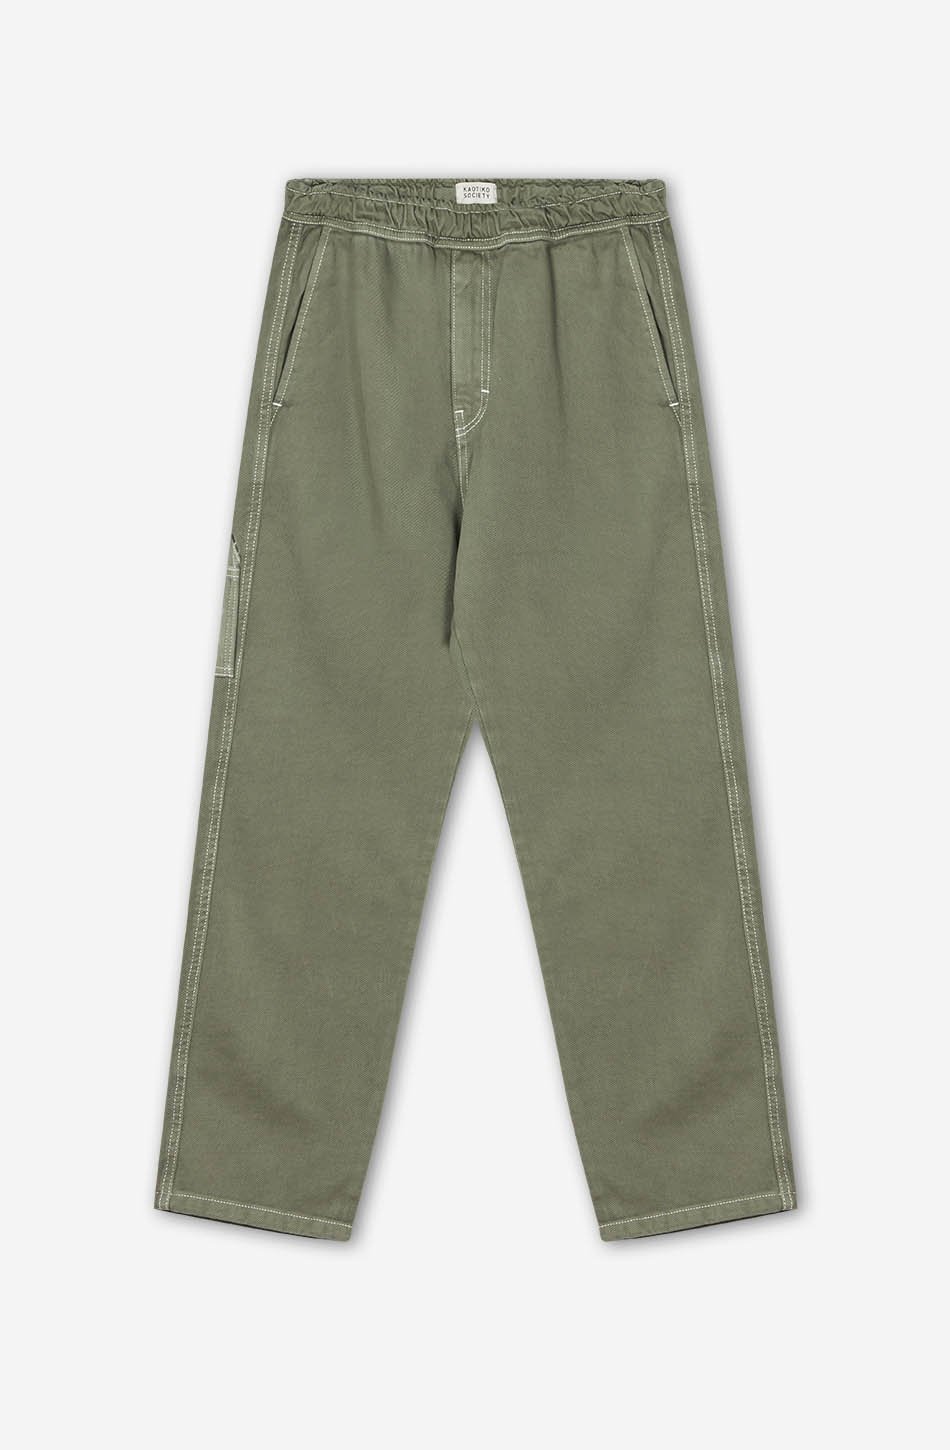 New Army Carpenter Trousers